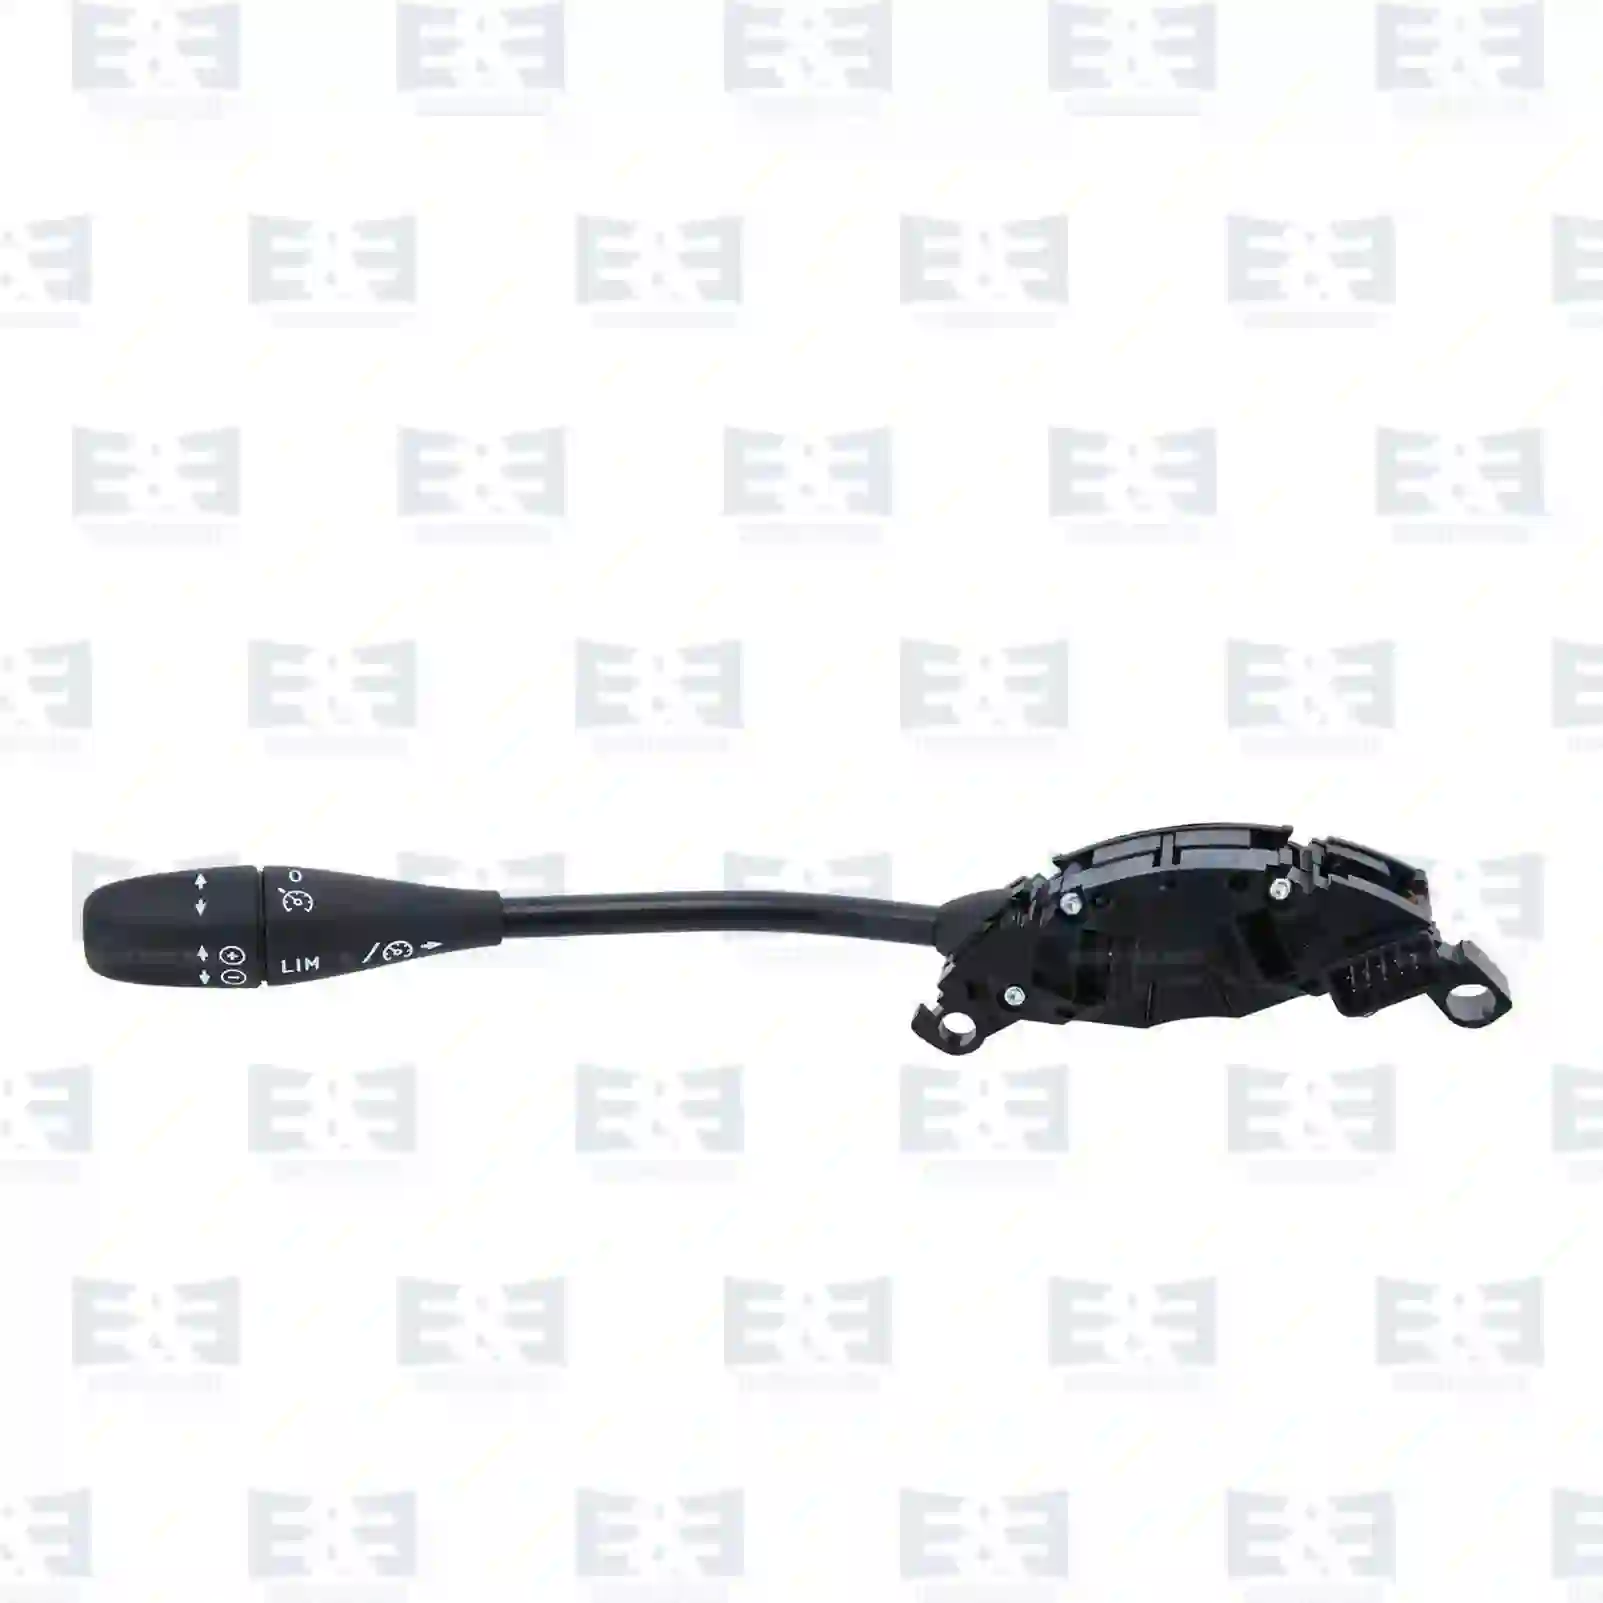  Steering column switch, cruise control || E&E Truck Spare Parts | Truck Spare Parts, Auotomotive Spare Parts